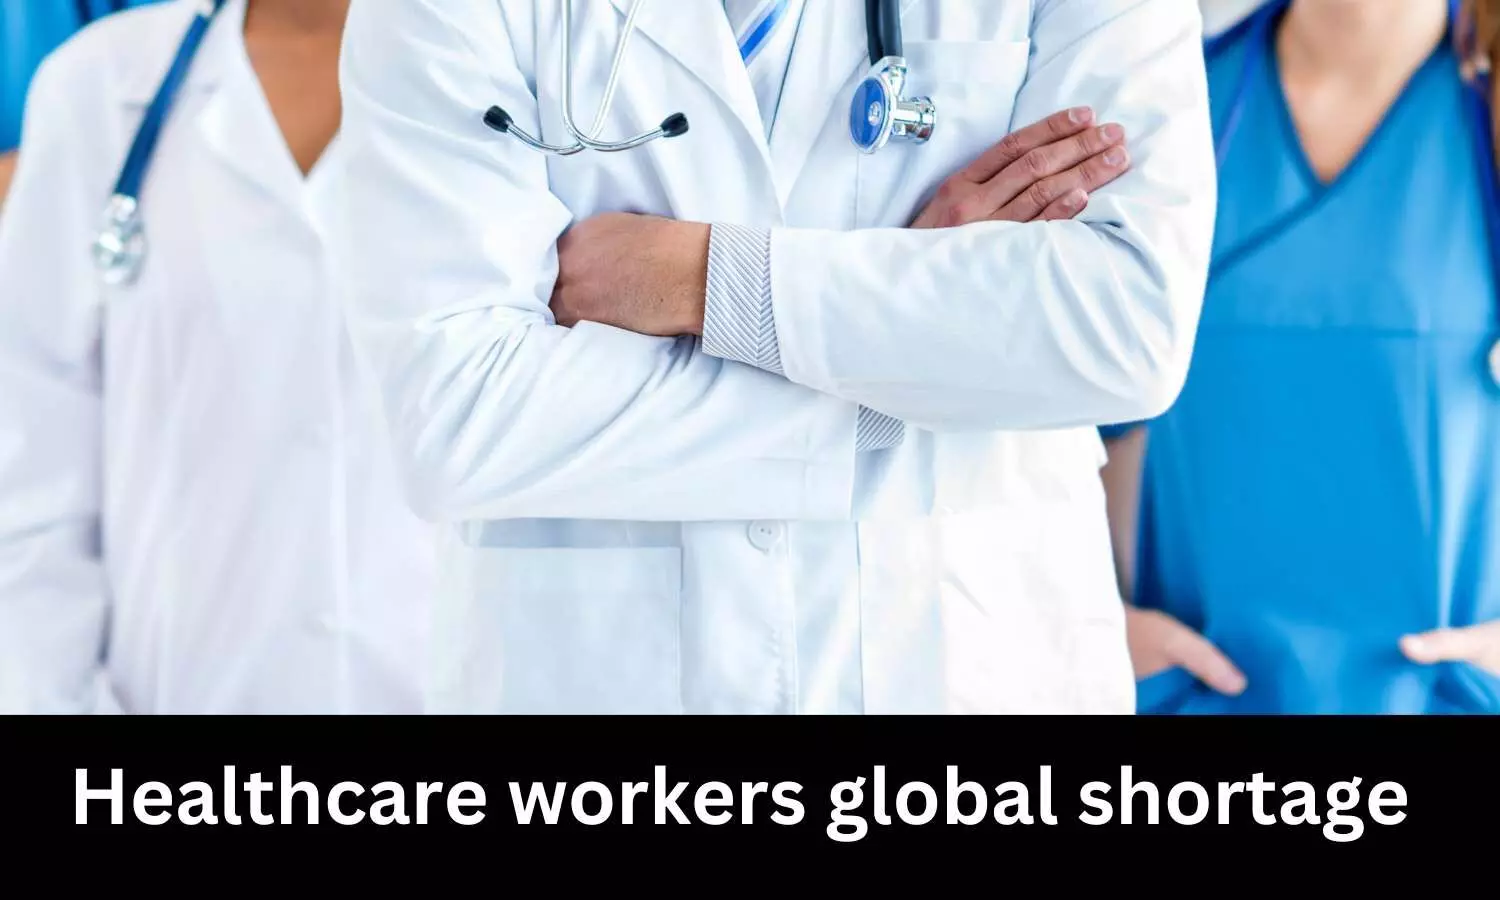 Healthcare workers global shortage may increase to 10 million by decade-end: WEF study